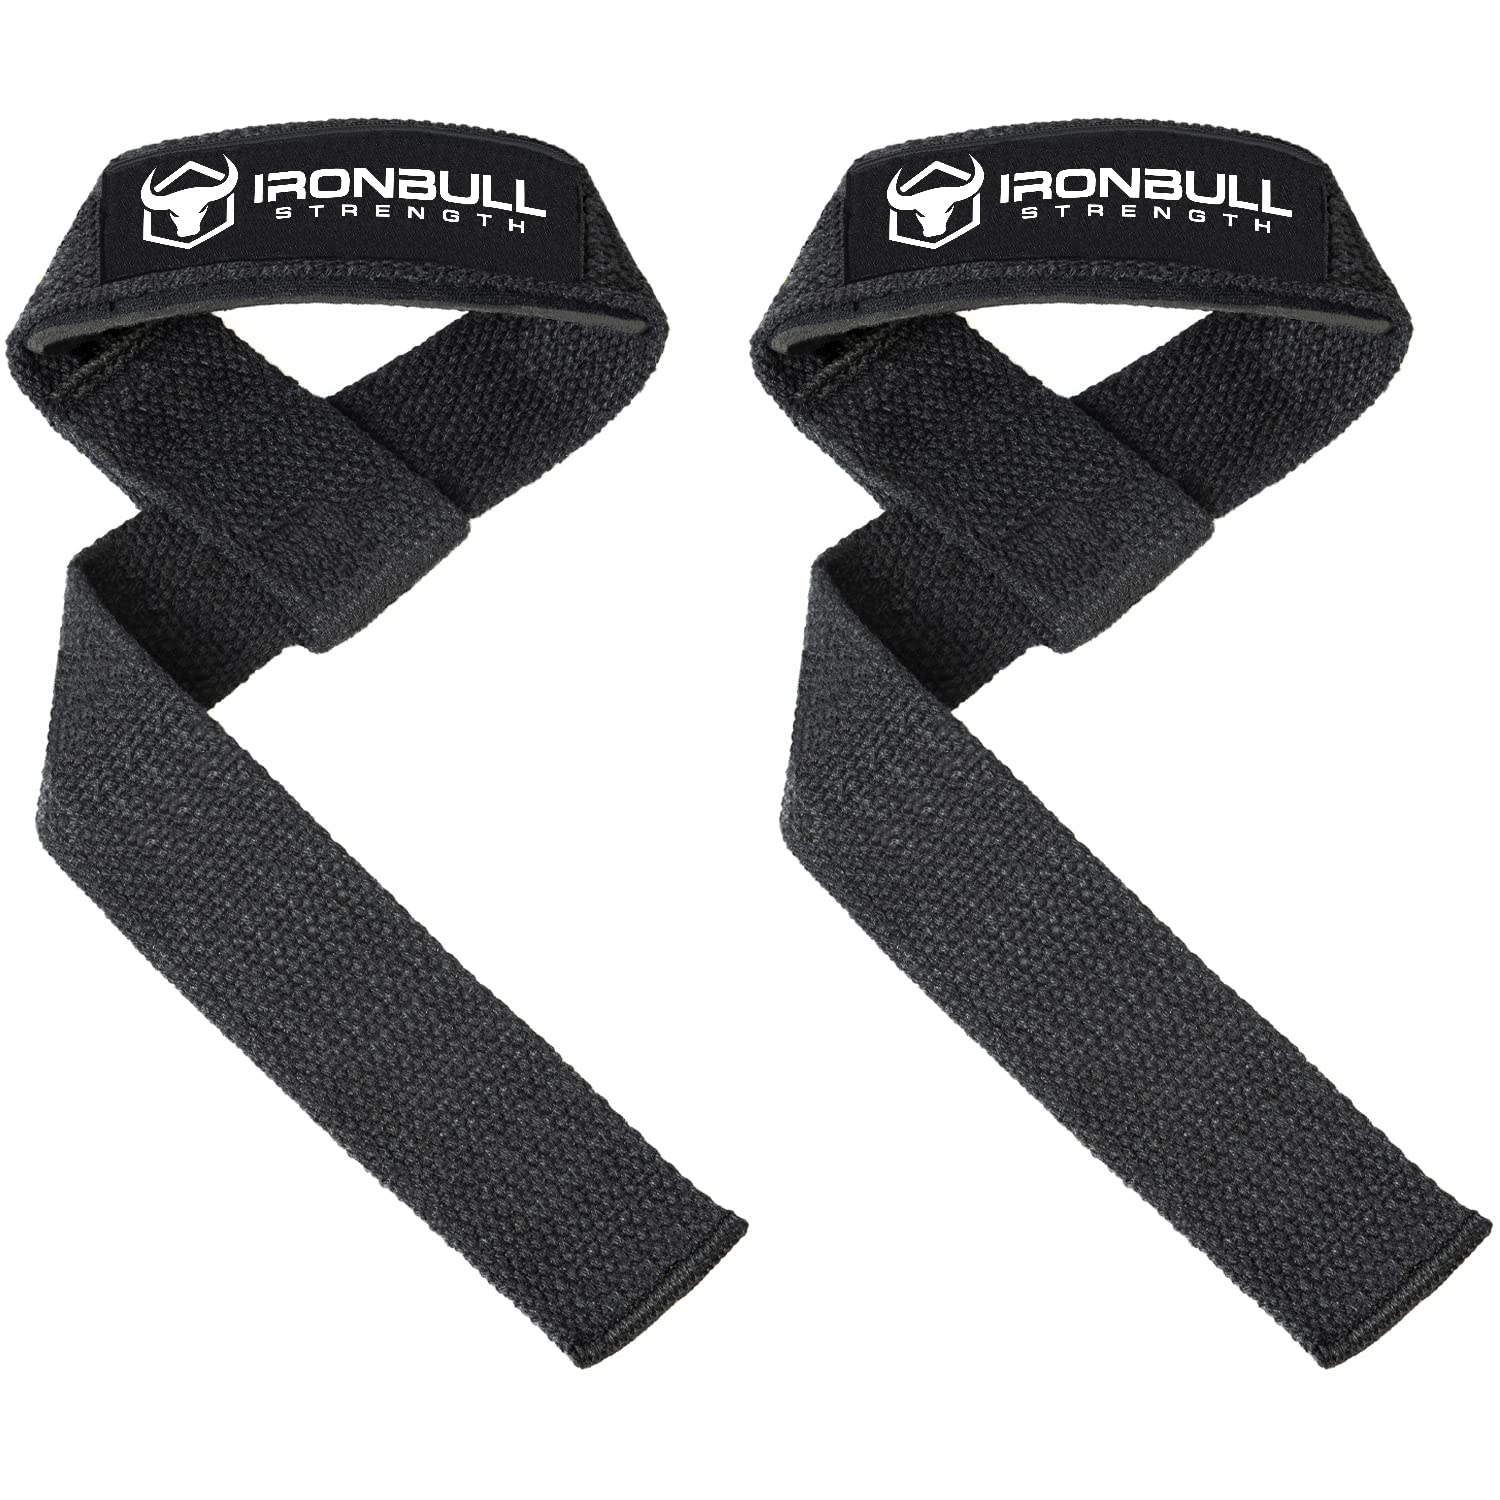 Lifting Straps (1 Pair) - Padded Wrist Support Wraps - for